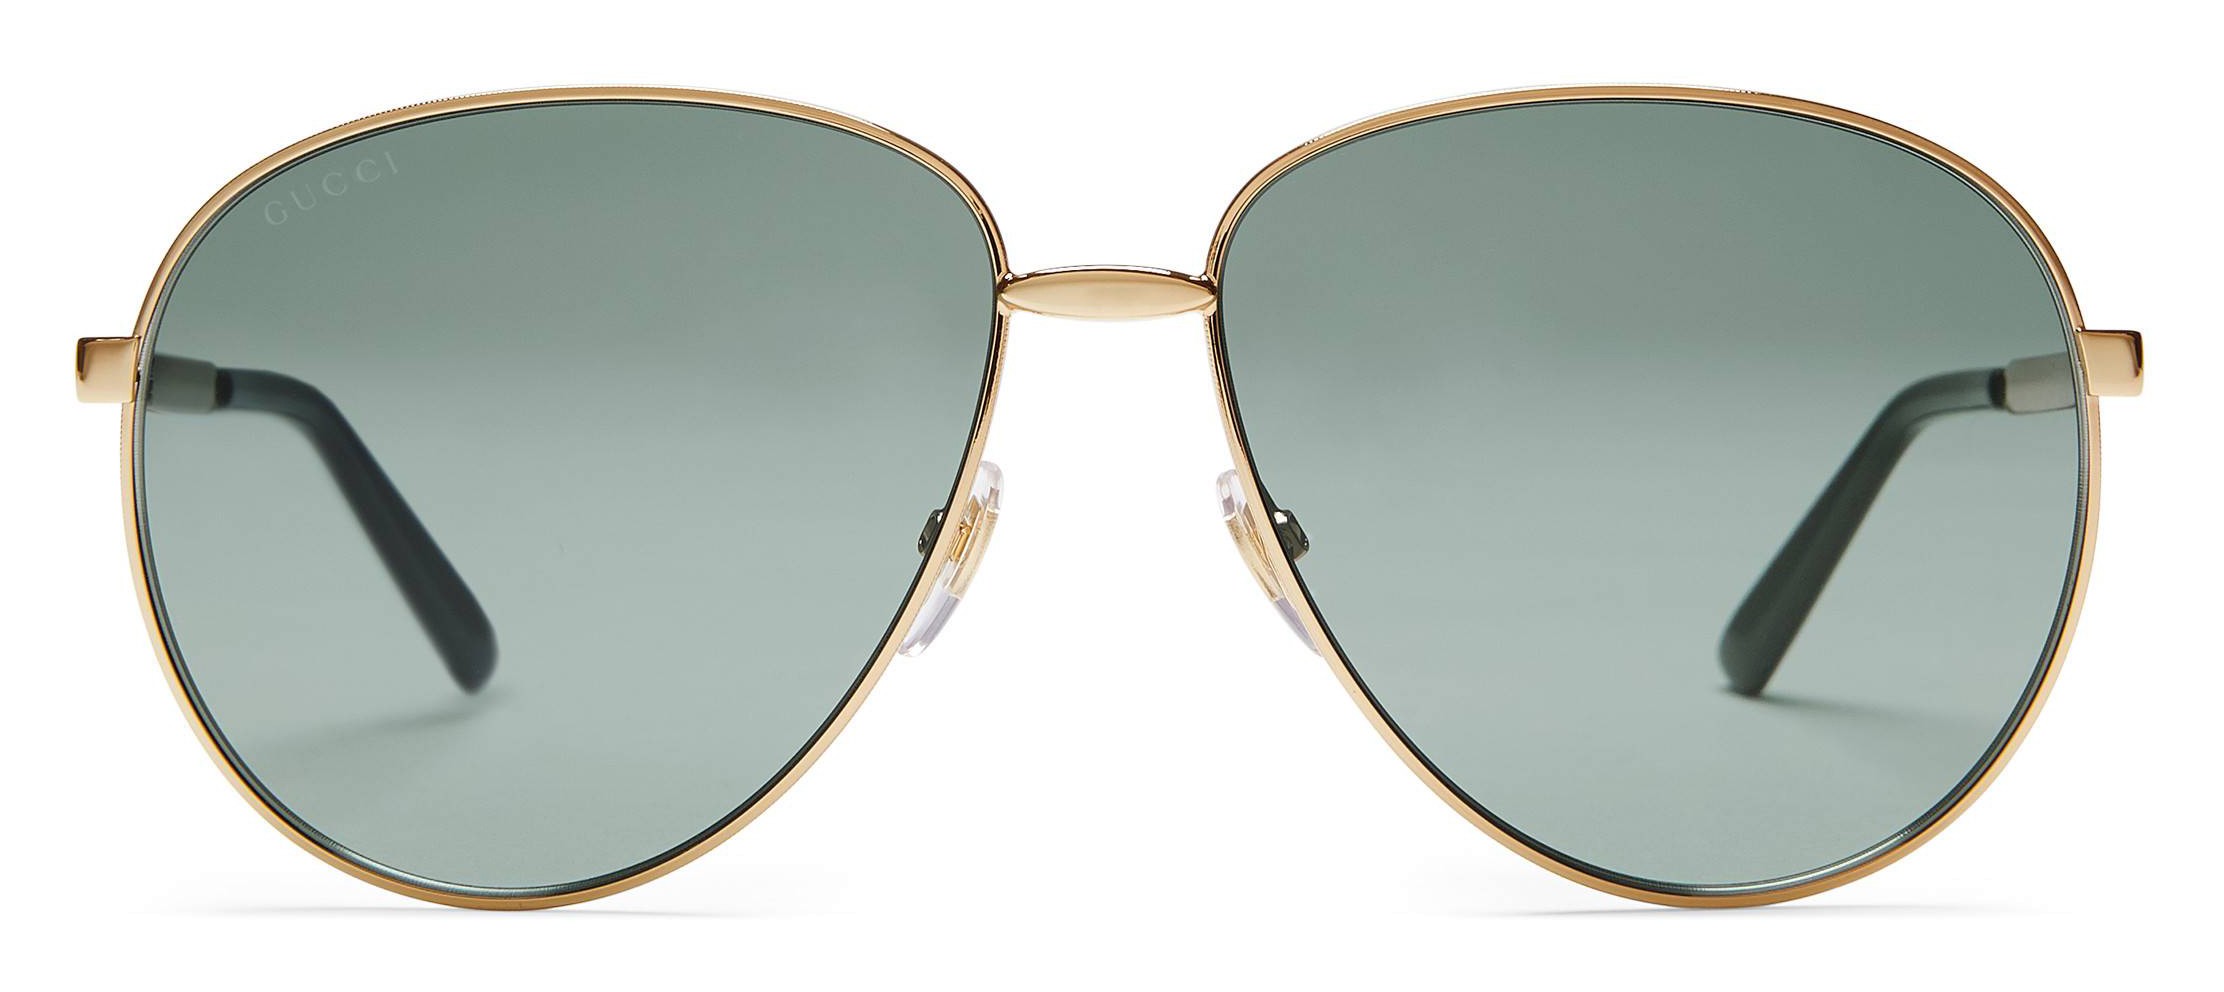 gucci aviator metal glasses with web